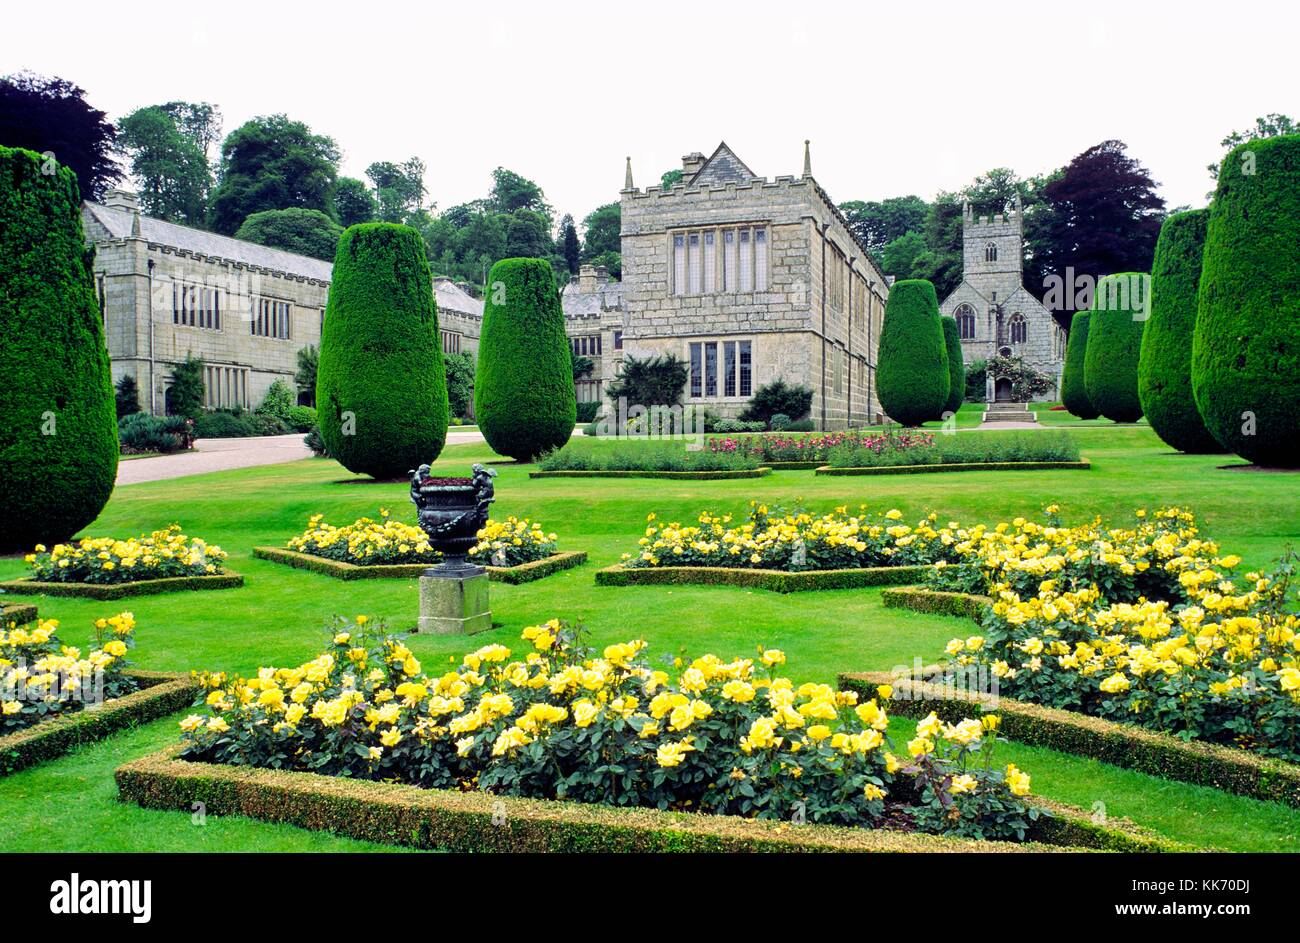 Lanhydrock English country mansion house near Bodmin in Cornwall, England, seen from the rose garden. Stock Photo